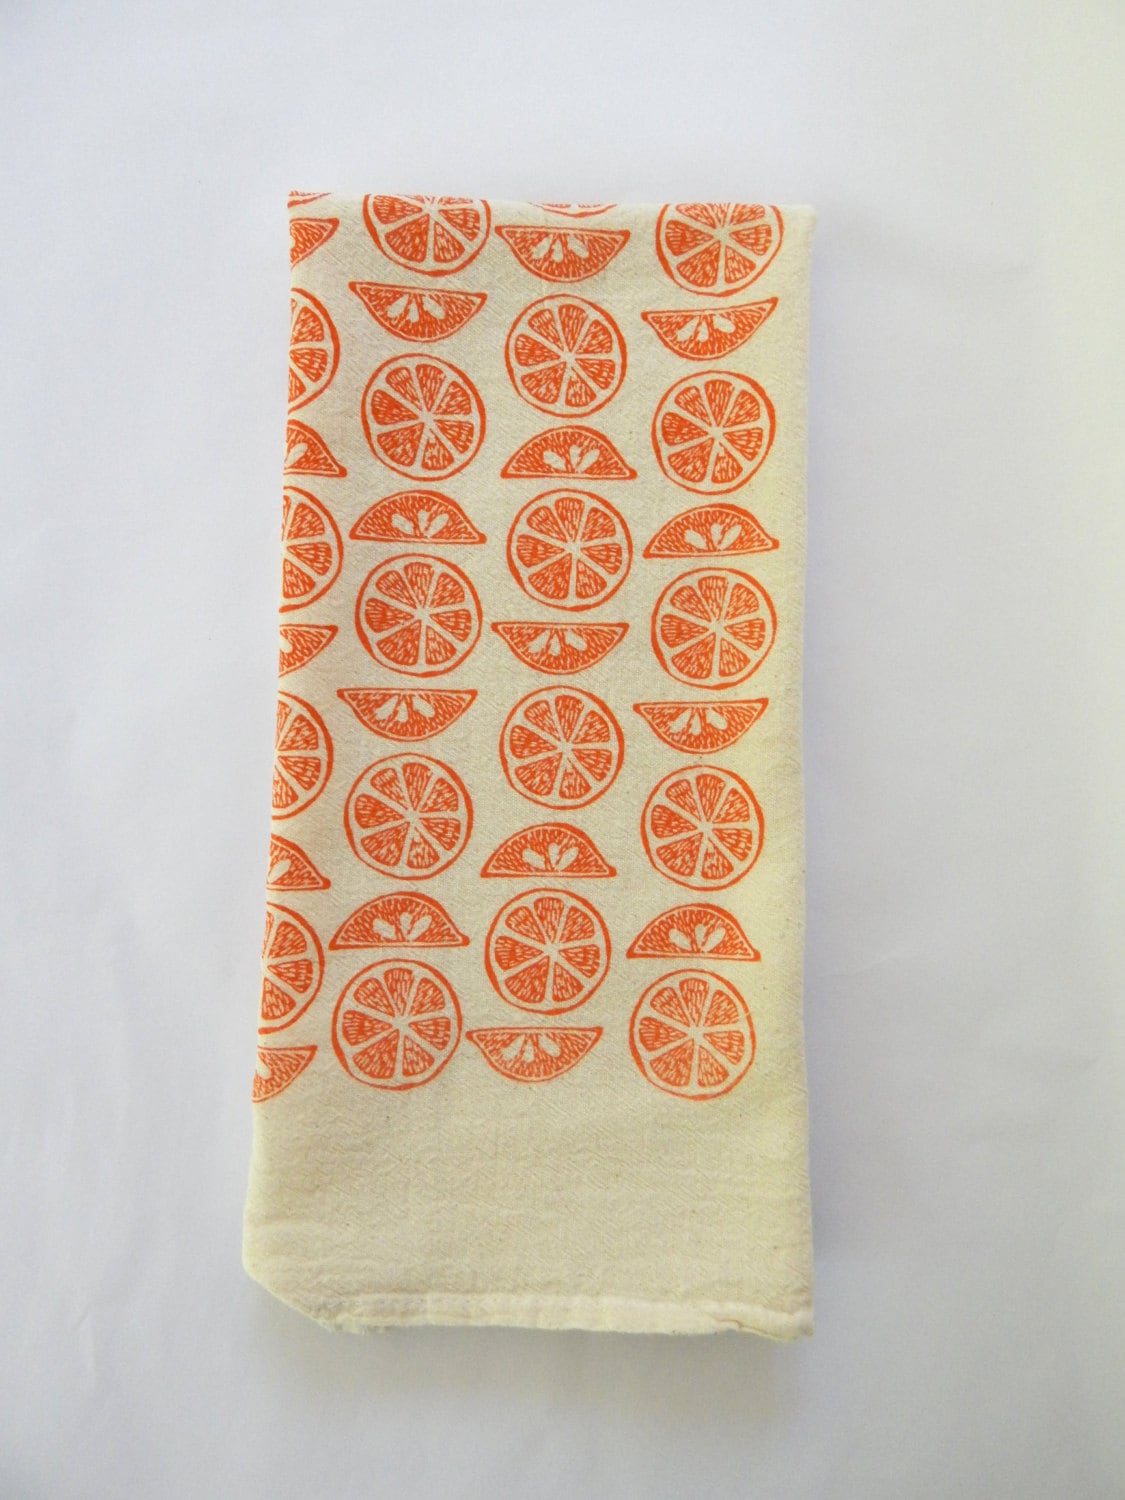 Kitchen Towels, Hand Printed Kitchen Towel Sets, Choose Your Set of 2,  Hostess Gift, Dish Towel Sets, Zero Waste Gifts, Housewarming Gift 